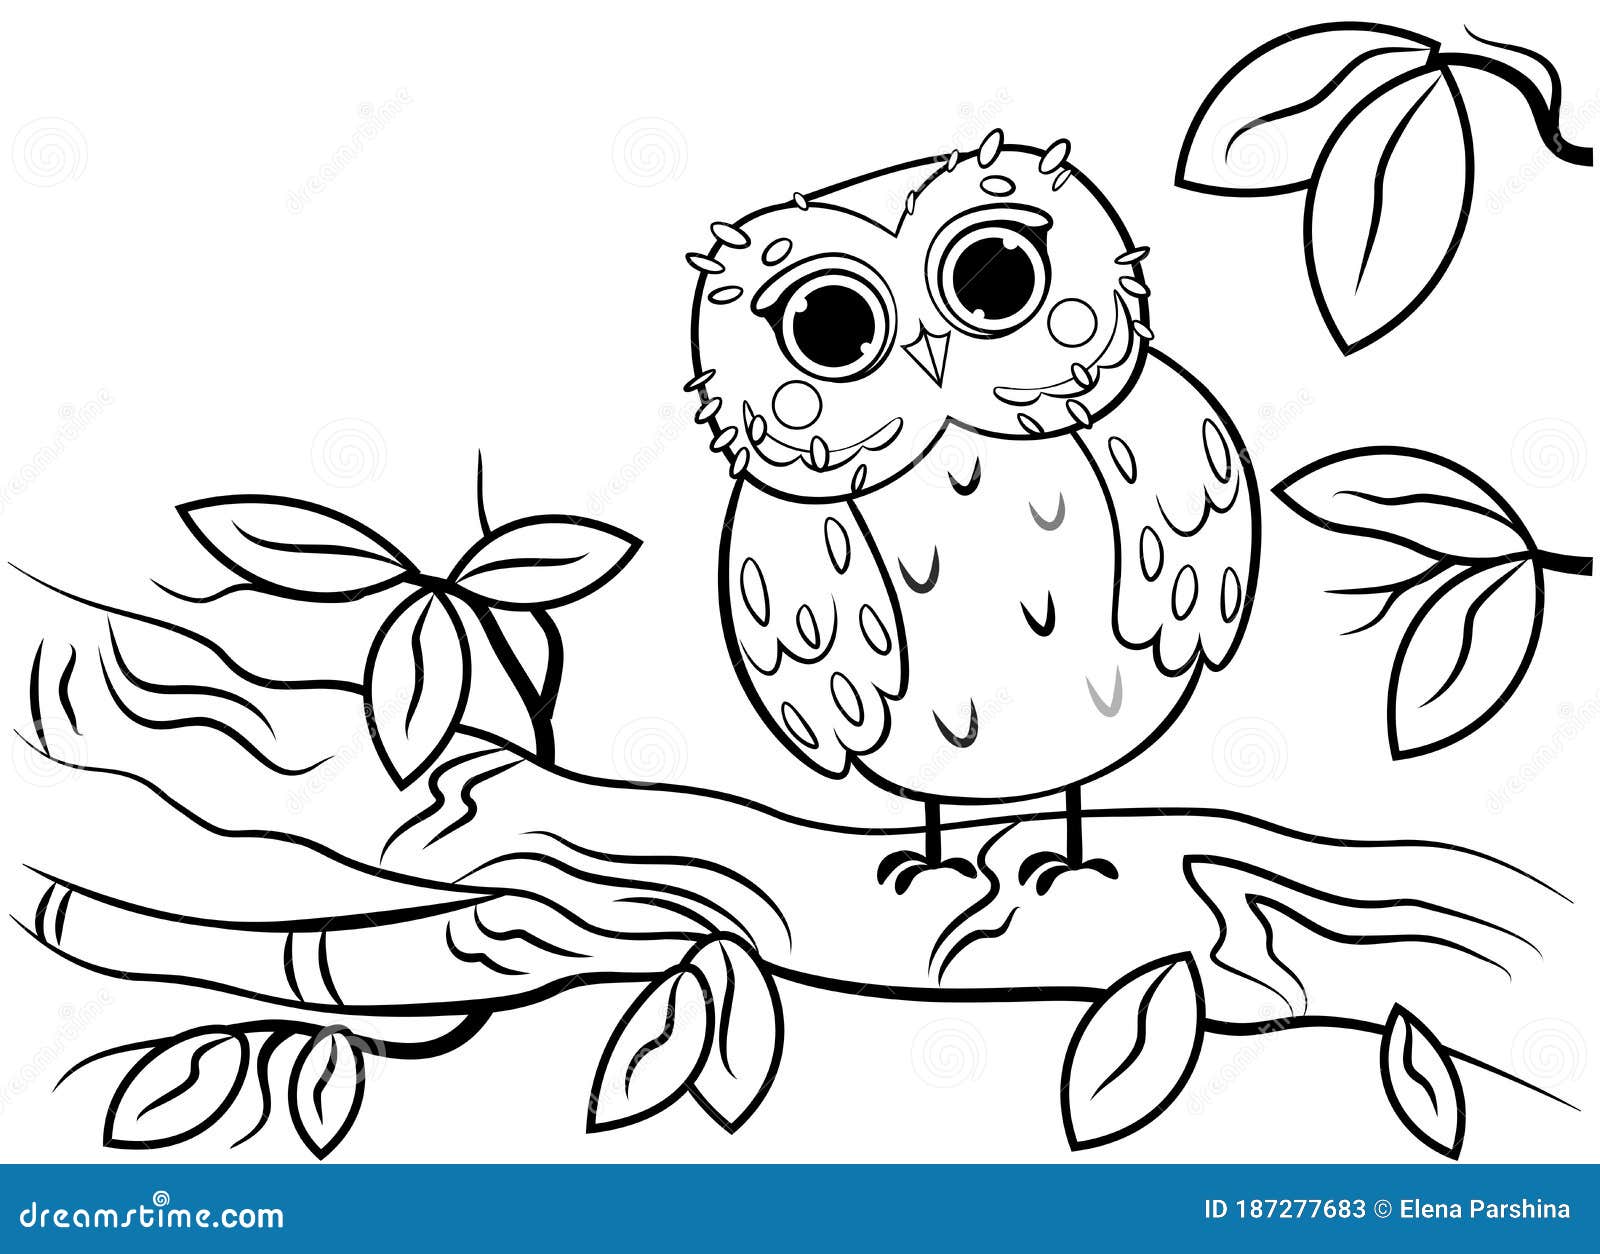 Printable coloring page outline of cute cartoon owl sitting on a tree branch vector image stock vector